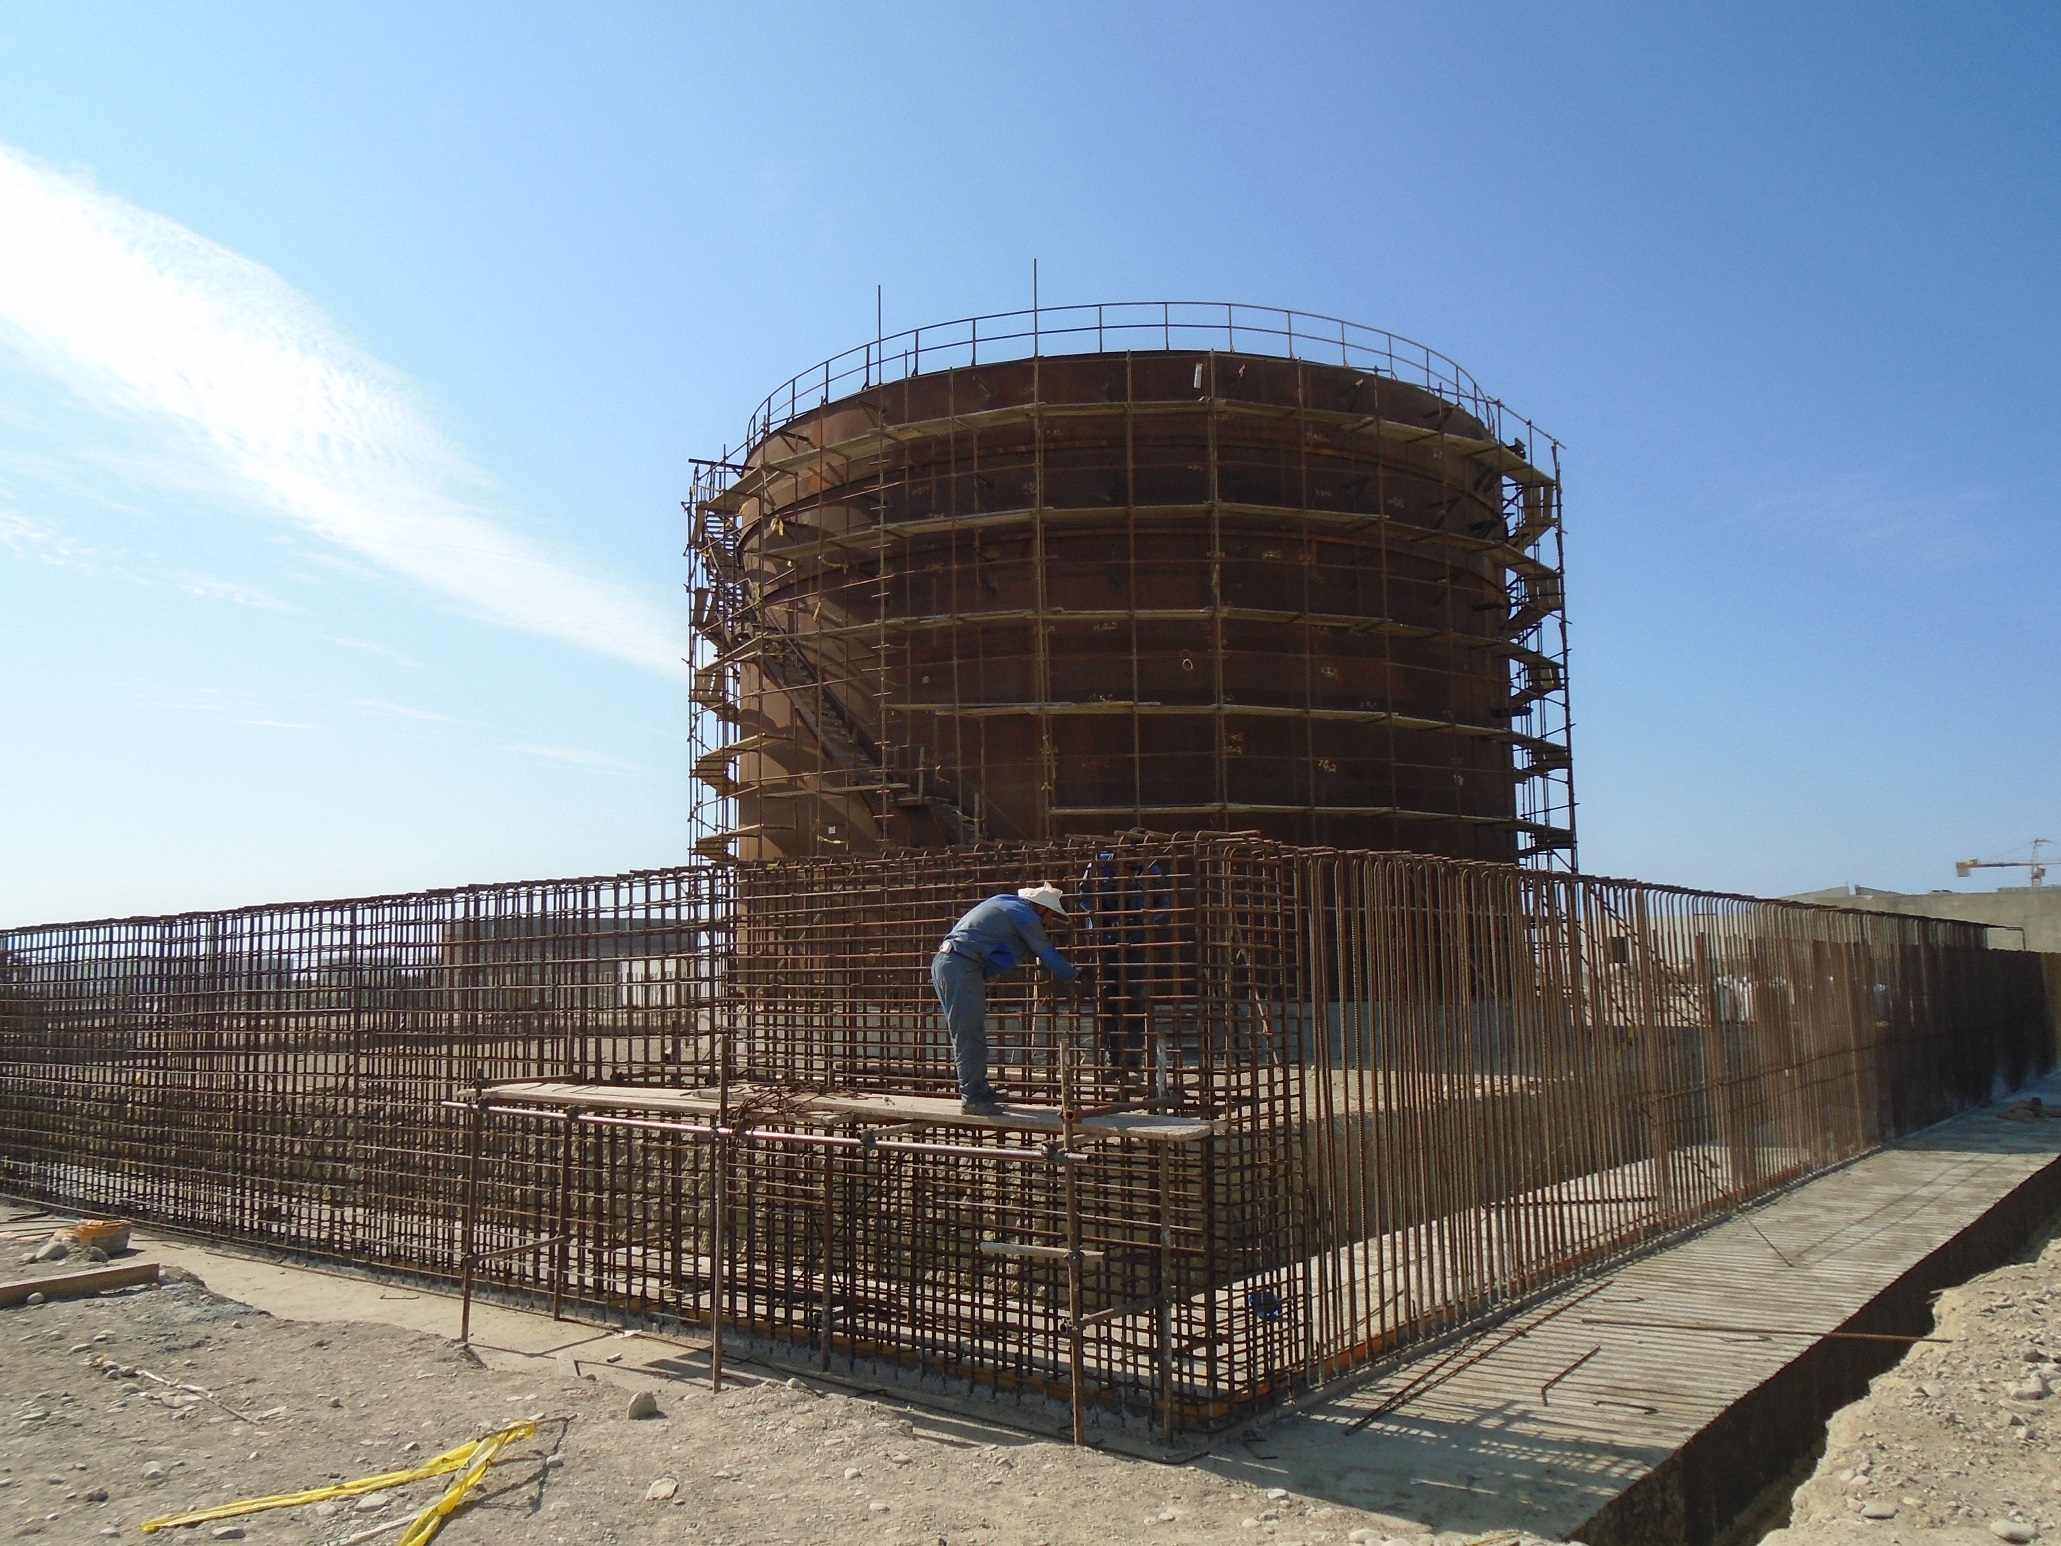 Jask crude oil monthly storage tank;
Jask power plant